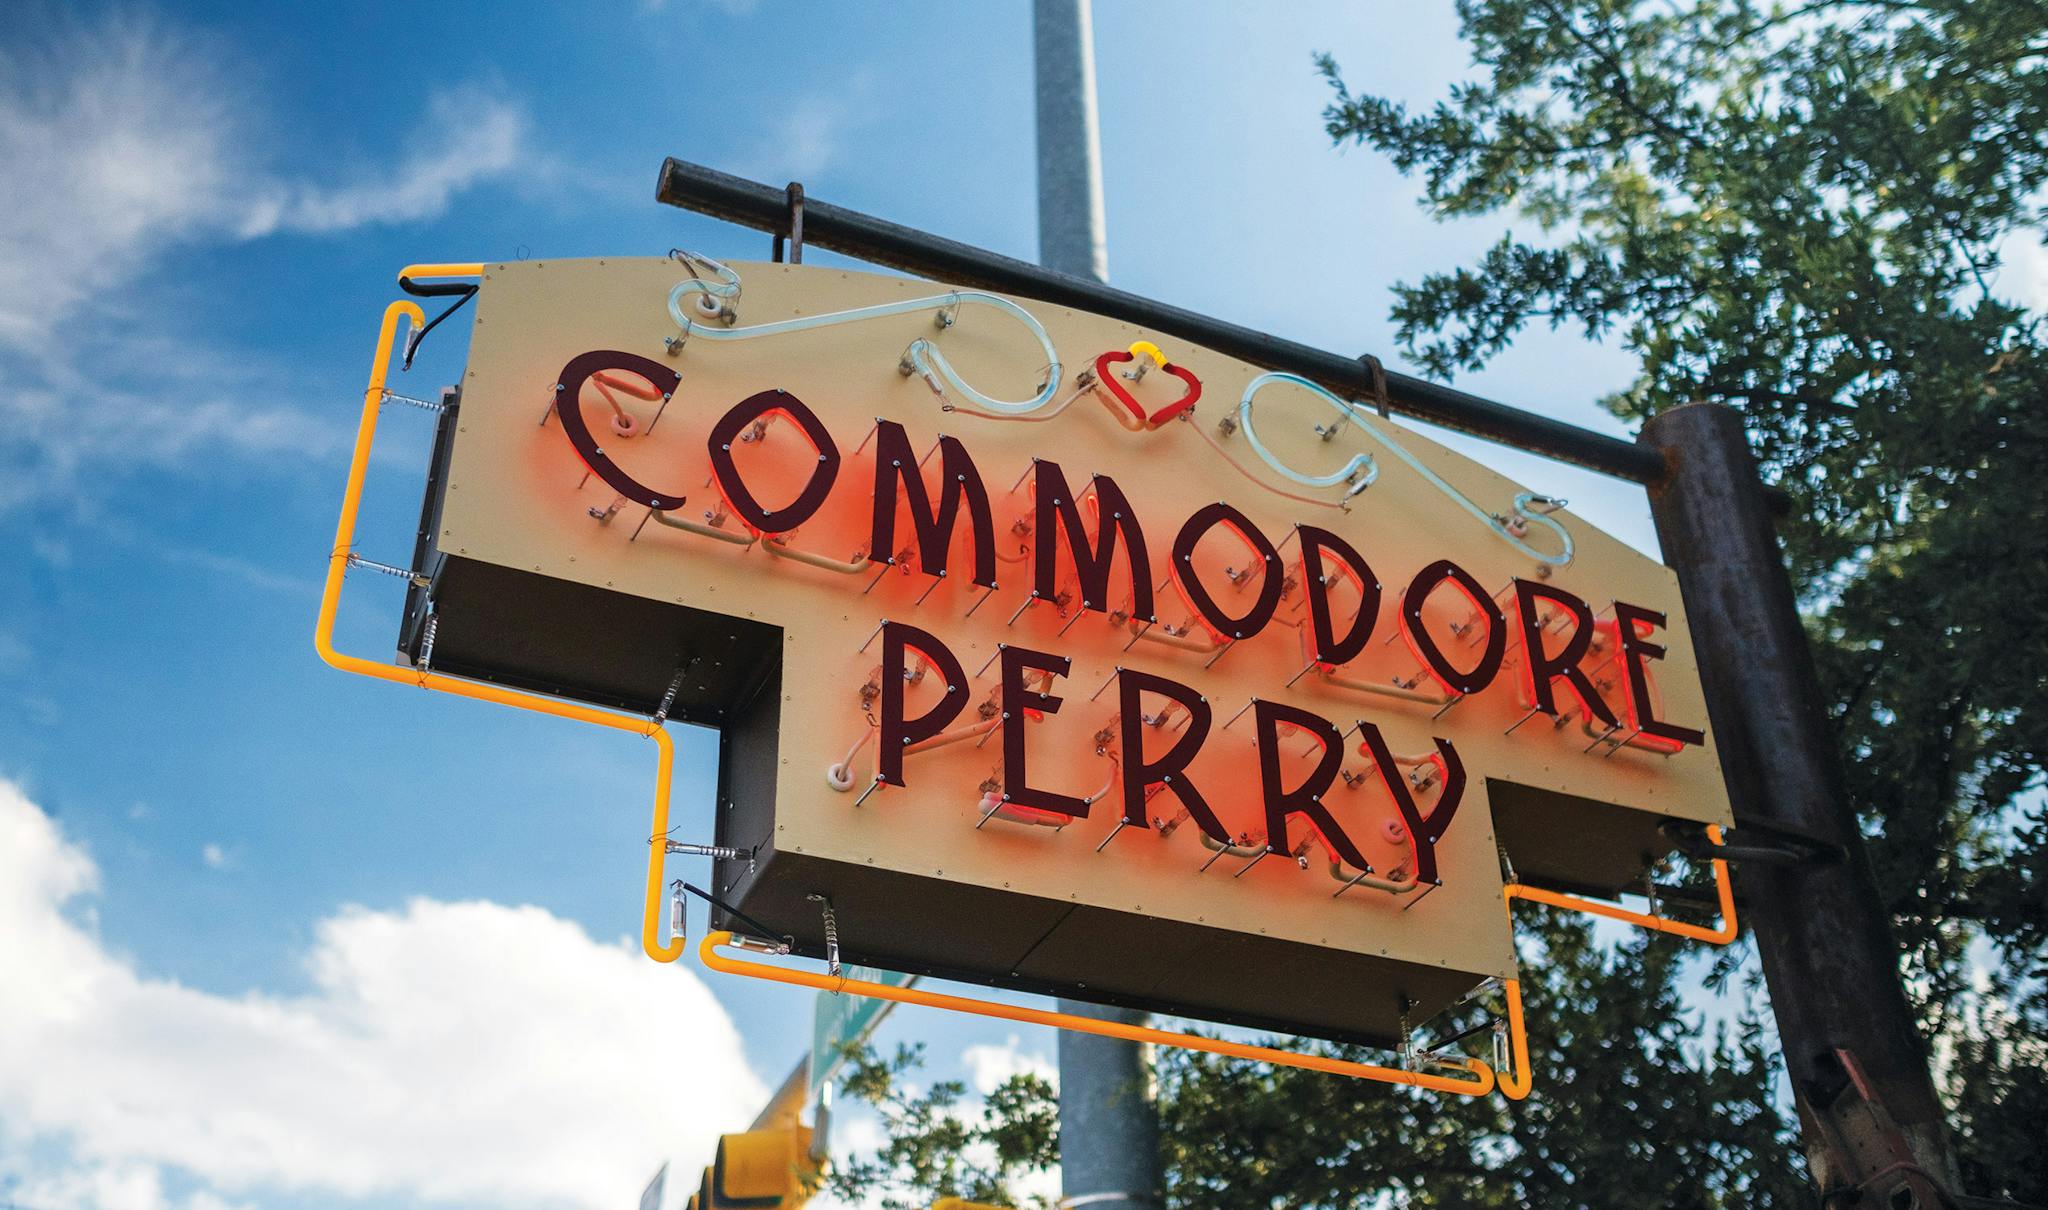 Commodore Perry sign.